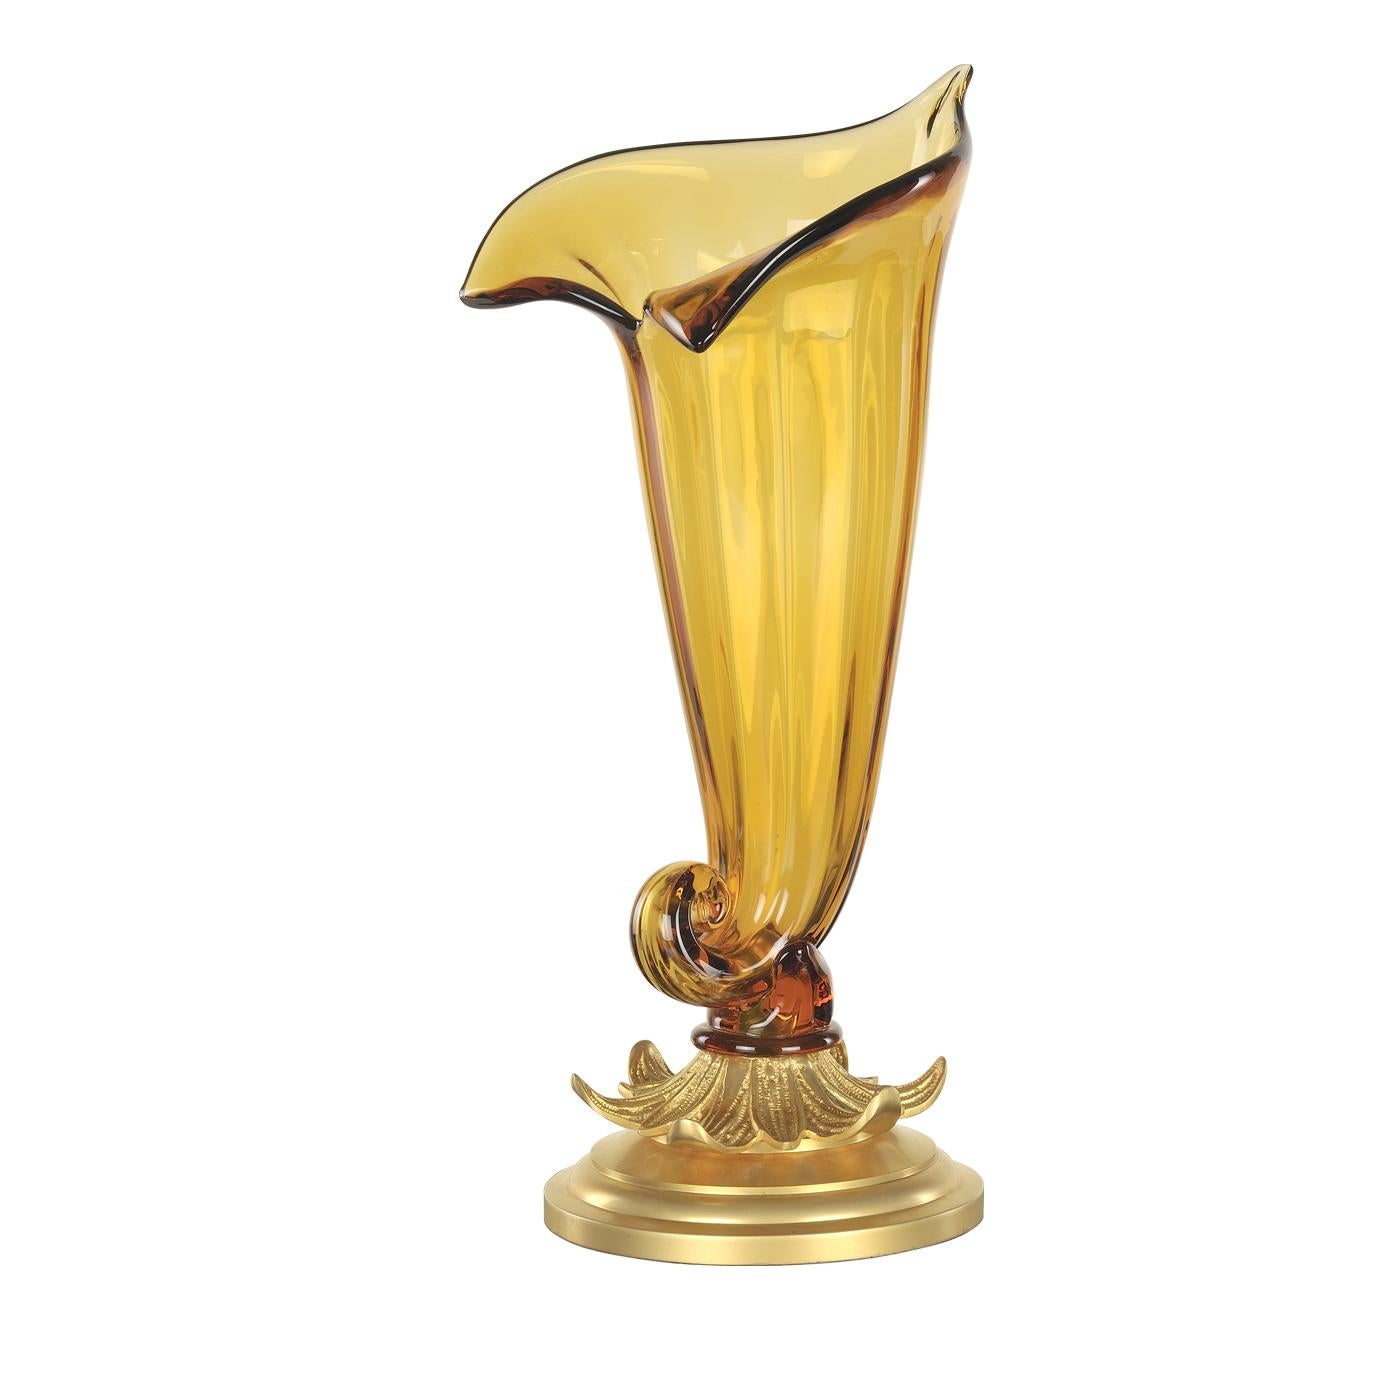 This striking vase rests on an exquisite bronze base with a satin gold finish. The body is in polished crystal with an amber color and depicts a zantedeschia, a flower known since Greek mythology and celebrated in poetry and painting. Its slender